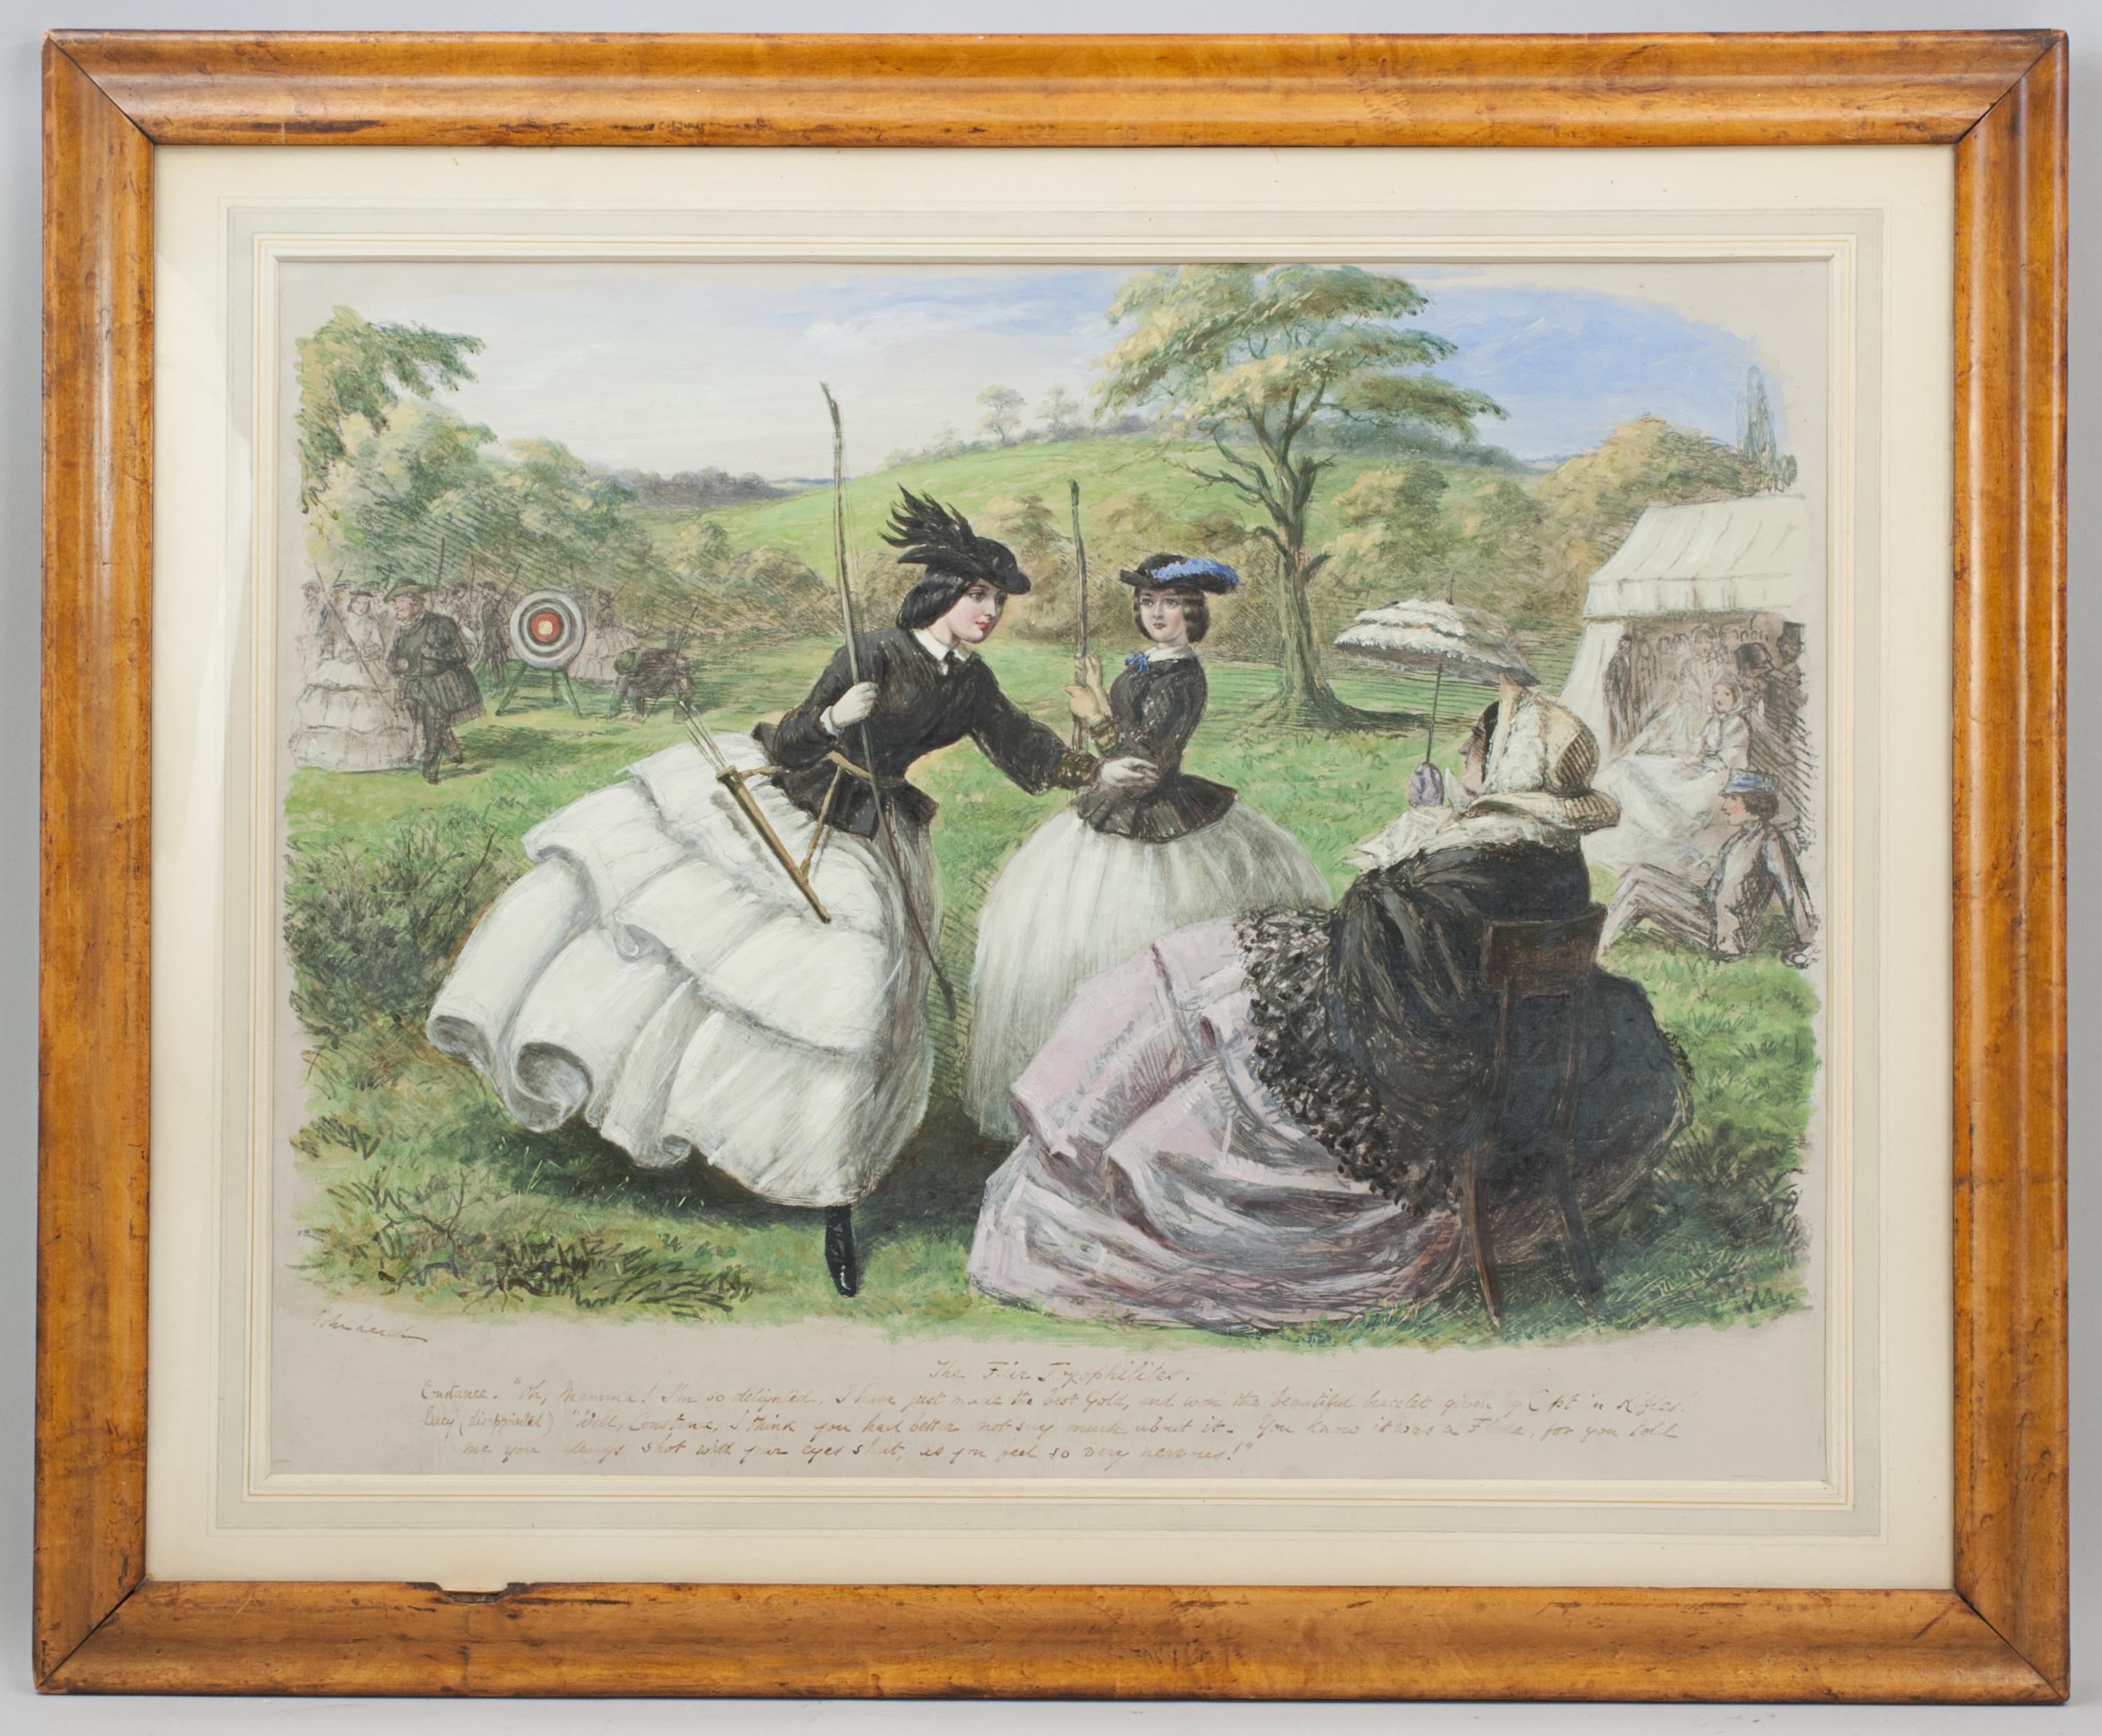 Original John Leech Archery Oil Painting, The Fair Toxopholites.
A fine original archery oil by John Leech titled 'The Fair Toxopholites', painted for his series of social scenes. This was used for the chromolithograph published by Thos. Agnew &